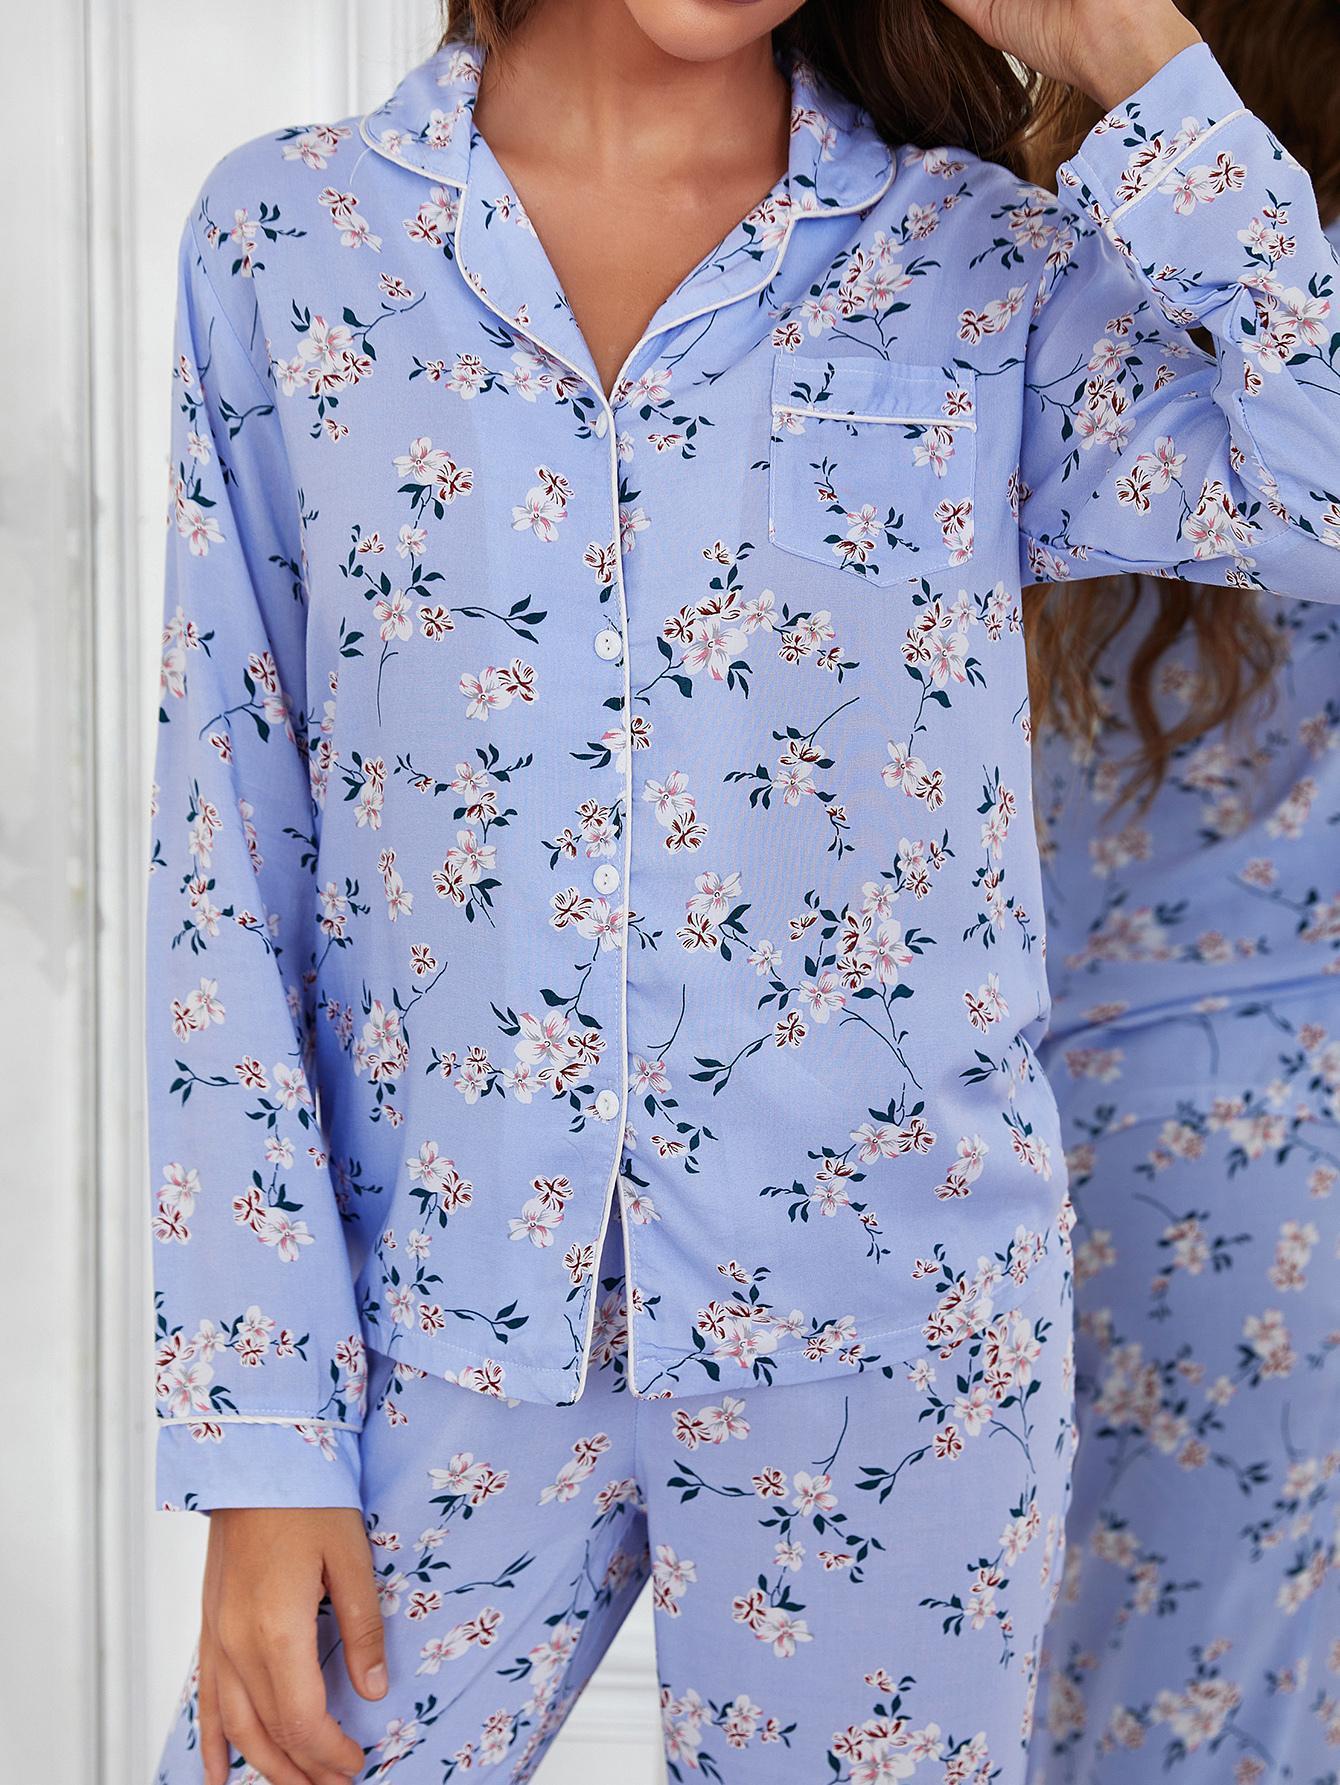 Floral Print Blue Pajama Set For Women Cotton Long Sleeve Button Down Lounge Nightwear Full-Length Bottom Notched Collar Suit - kmtell.com